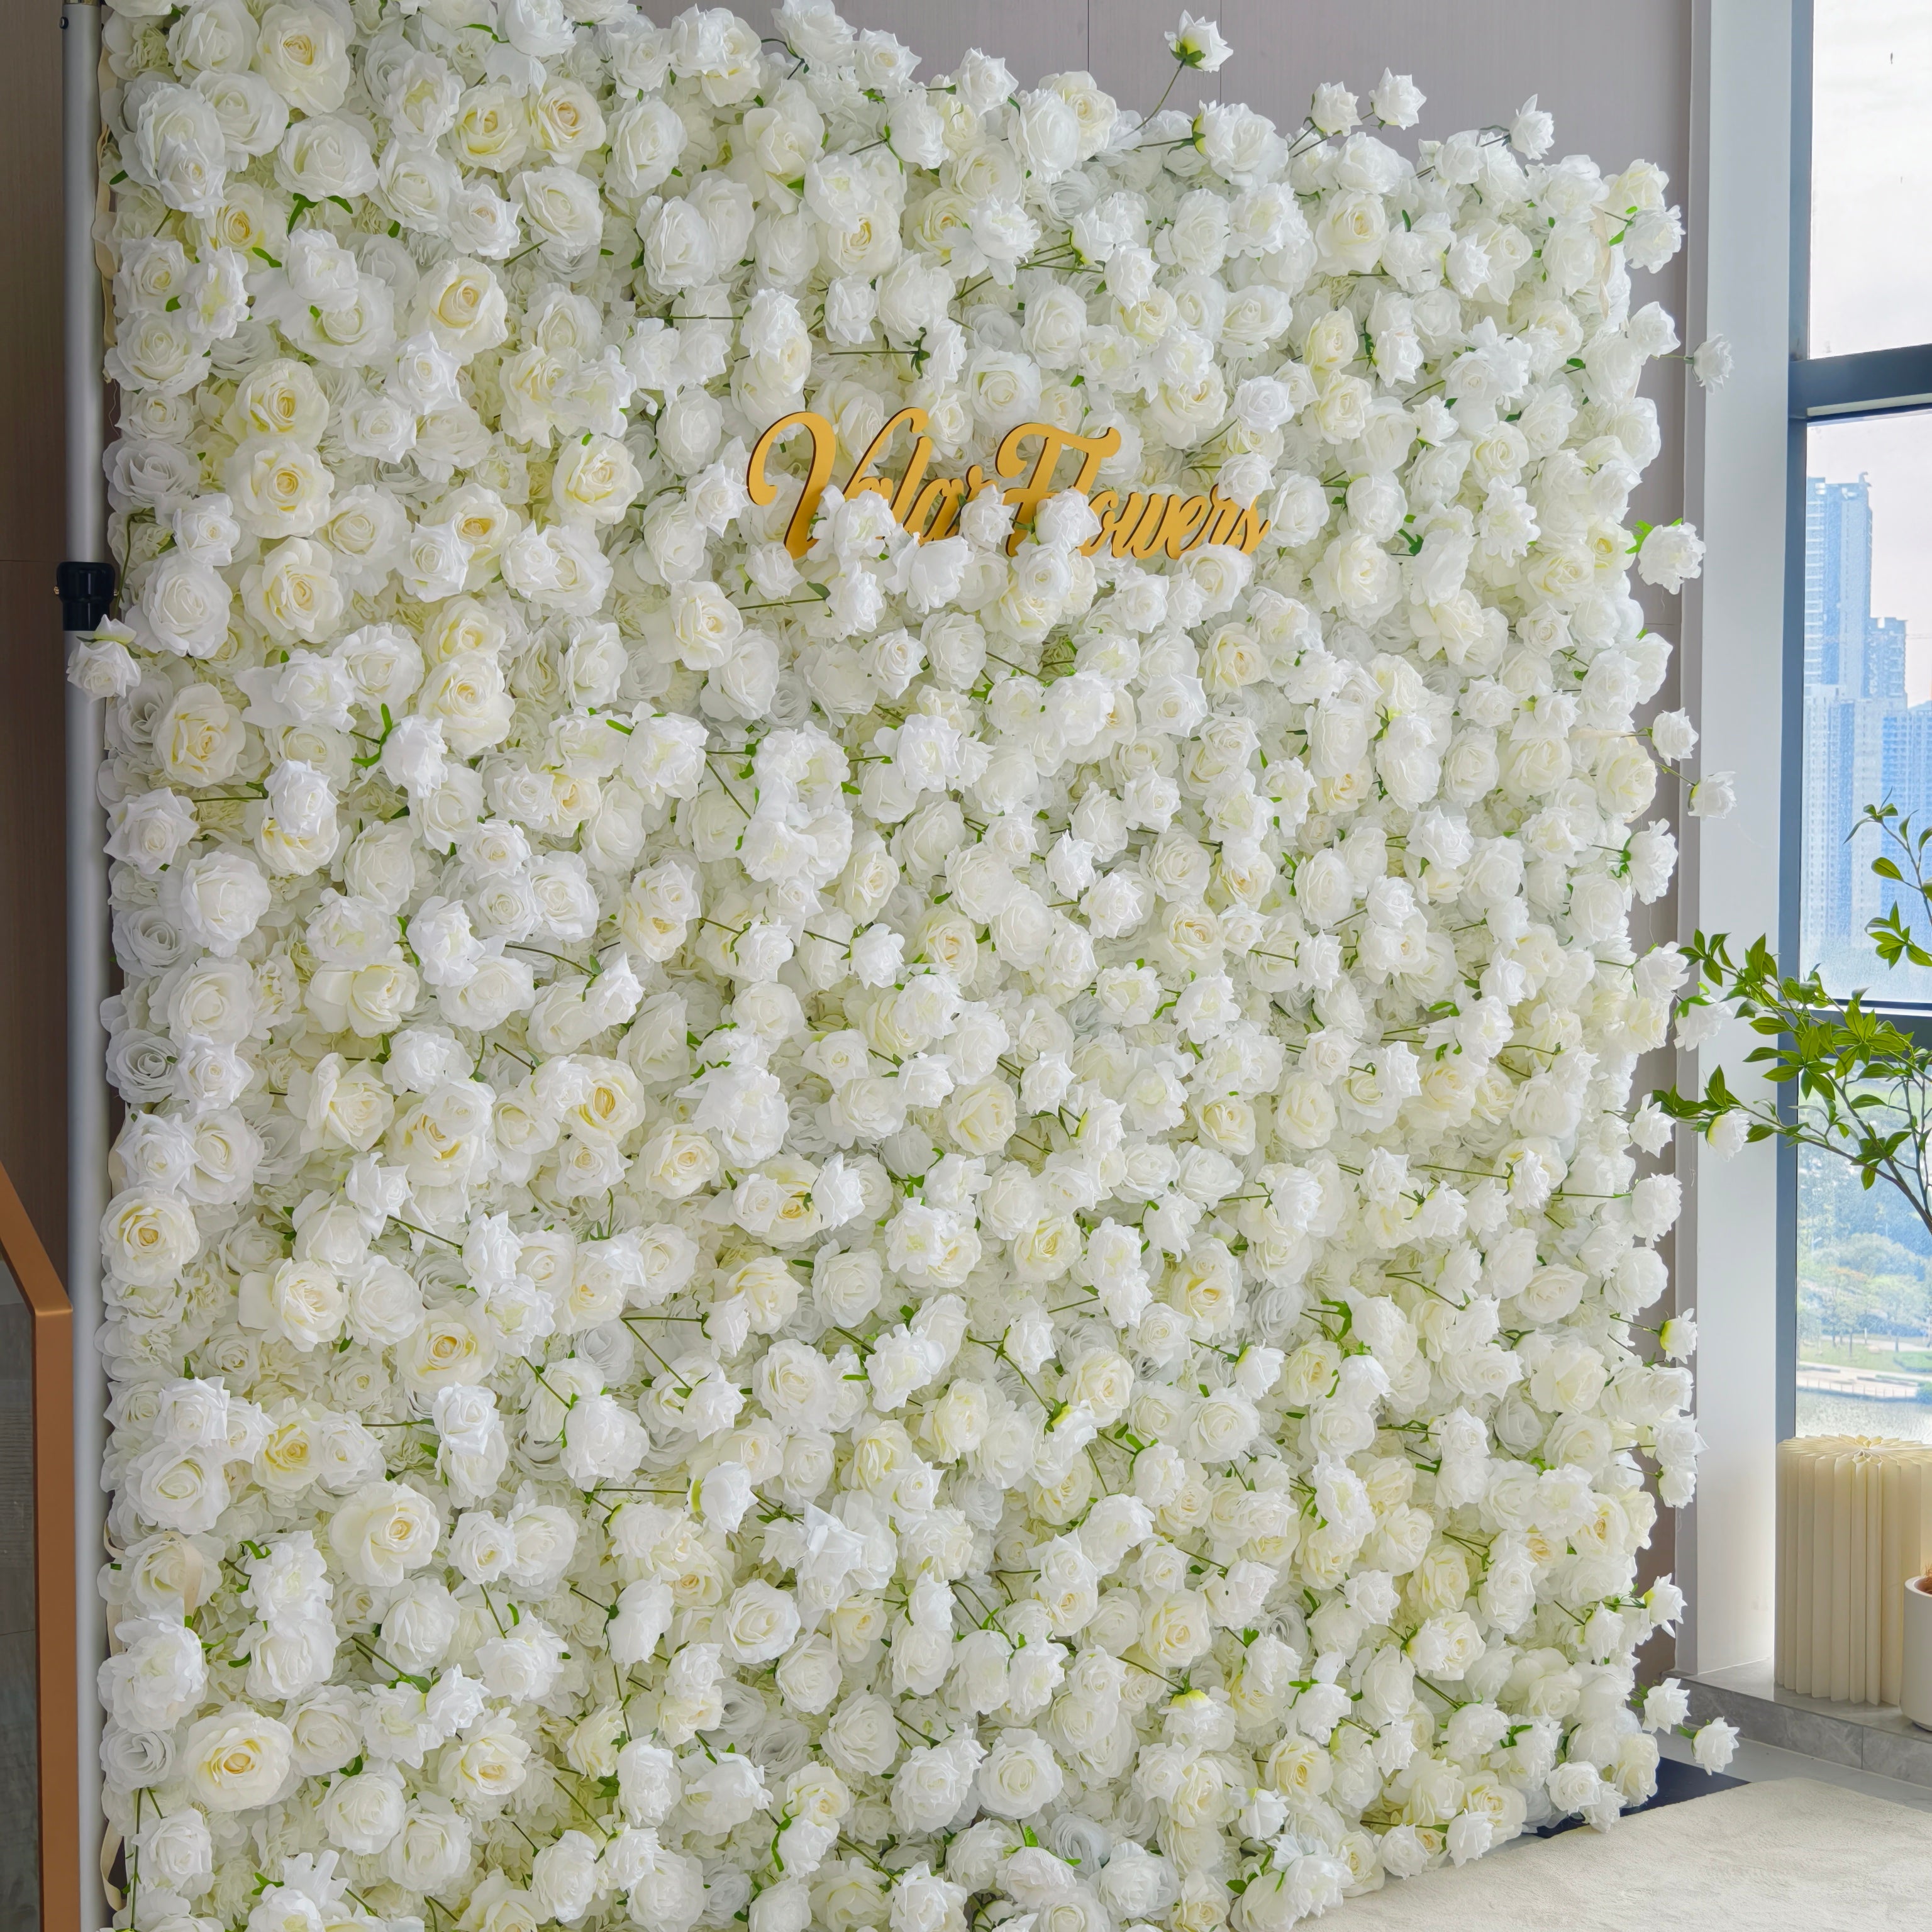 5D White Rose Roll-Up Flower Wall Backdrop for Wedding & Party Celebration Decor